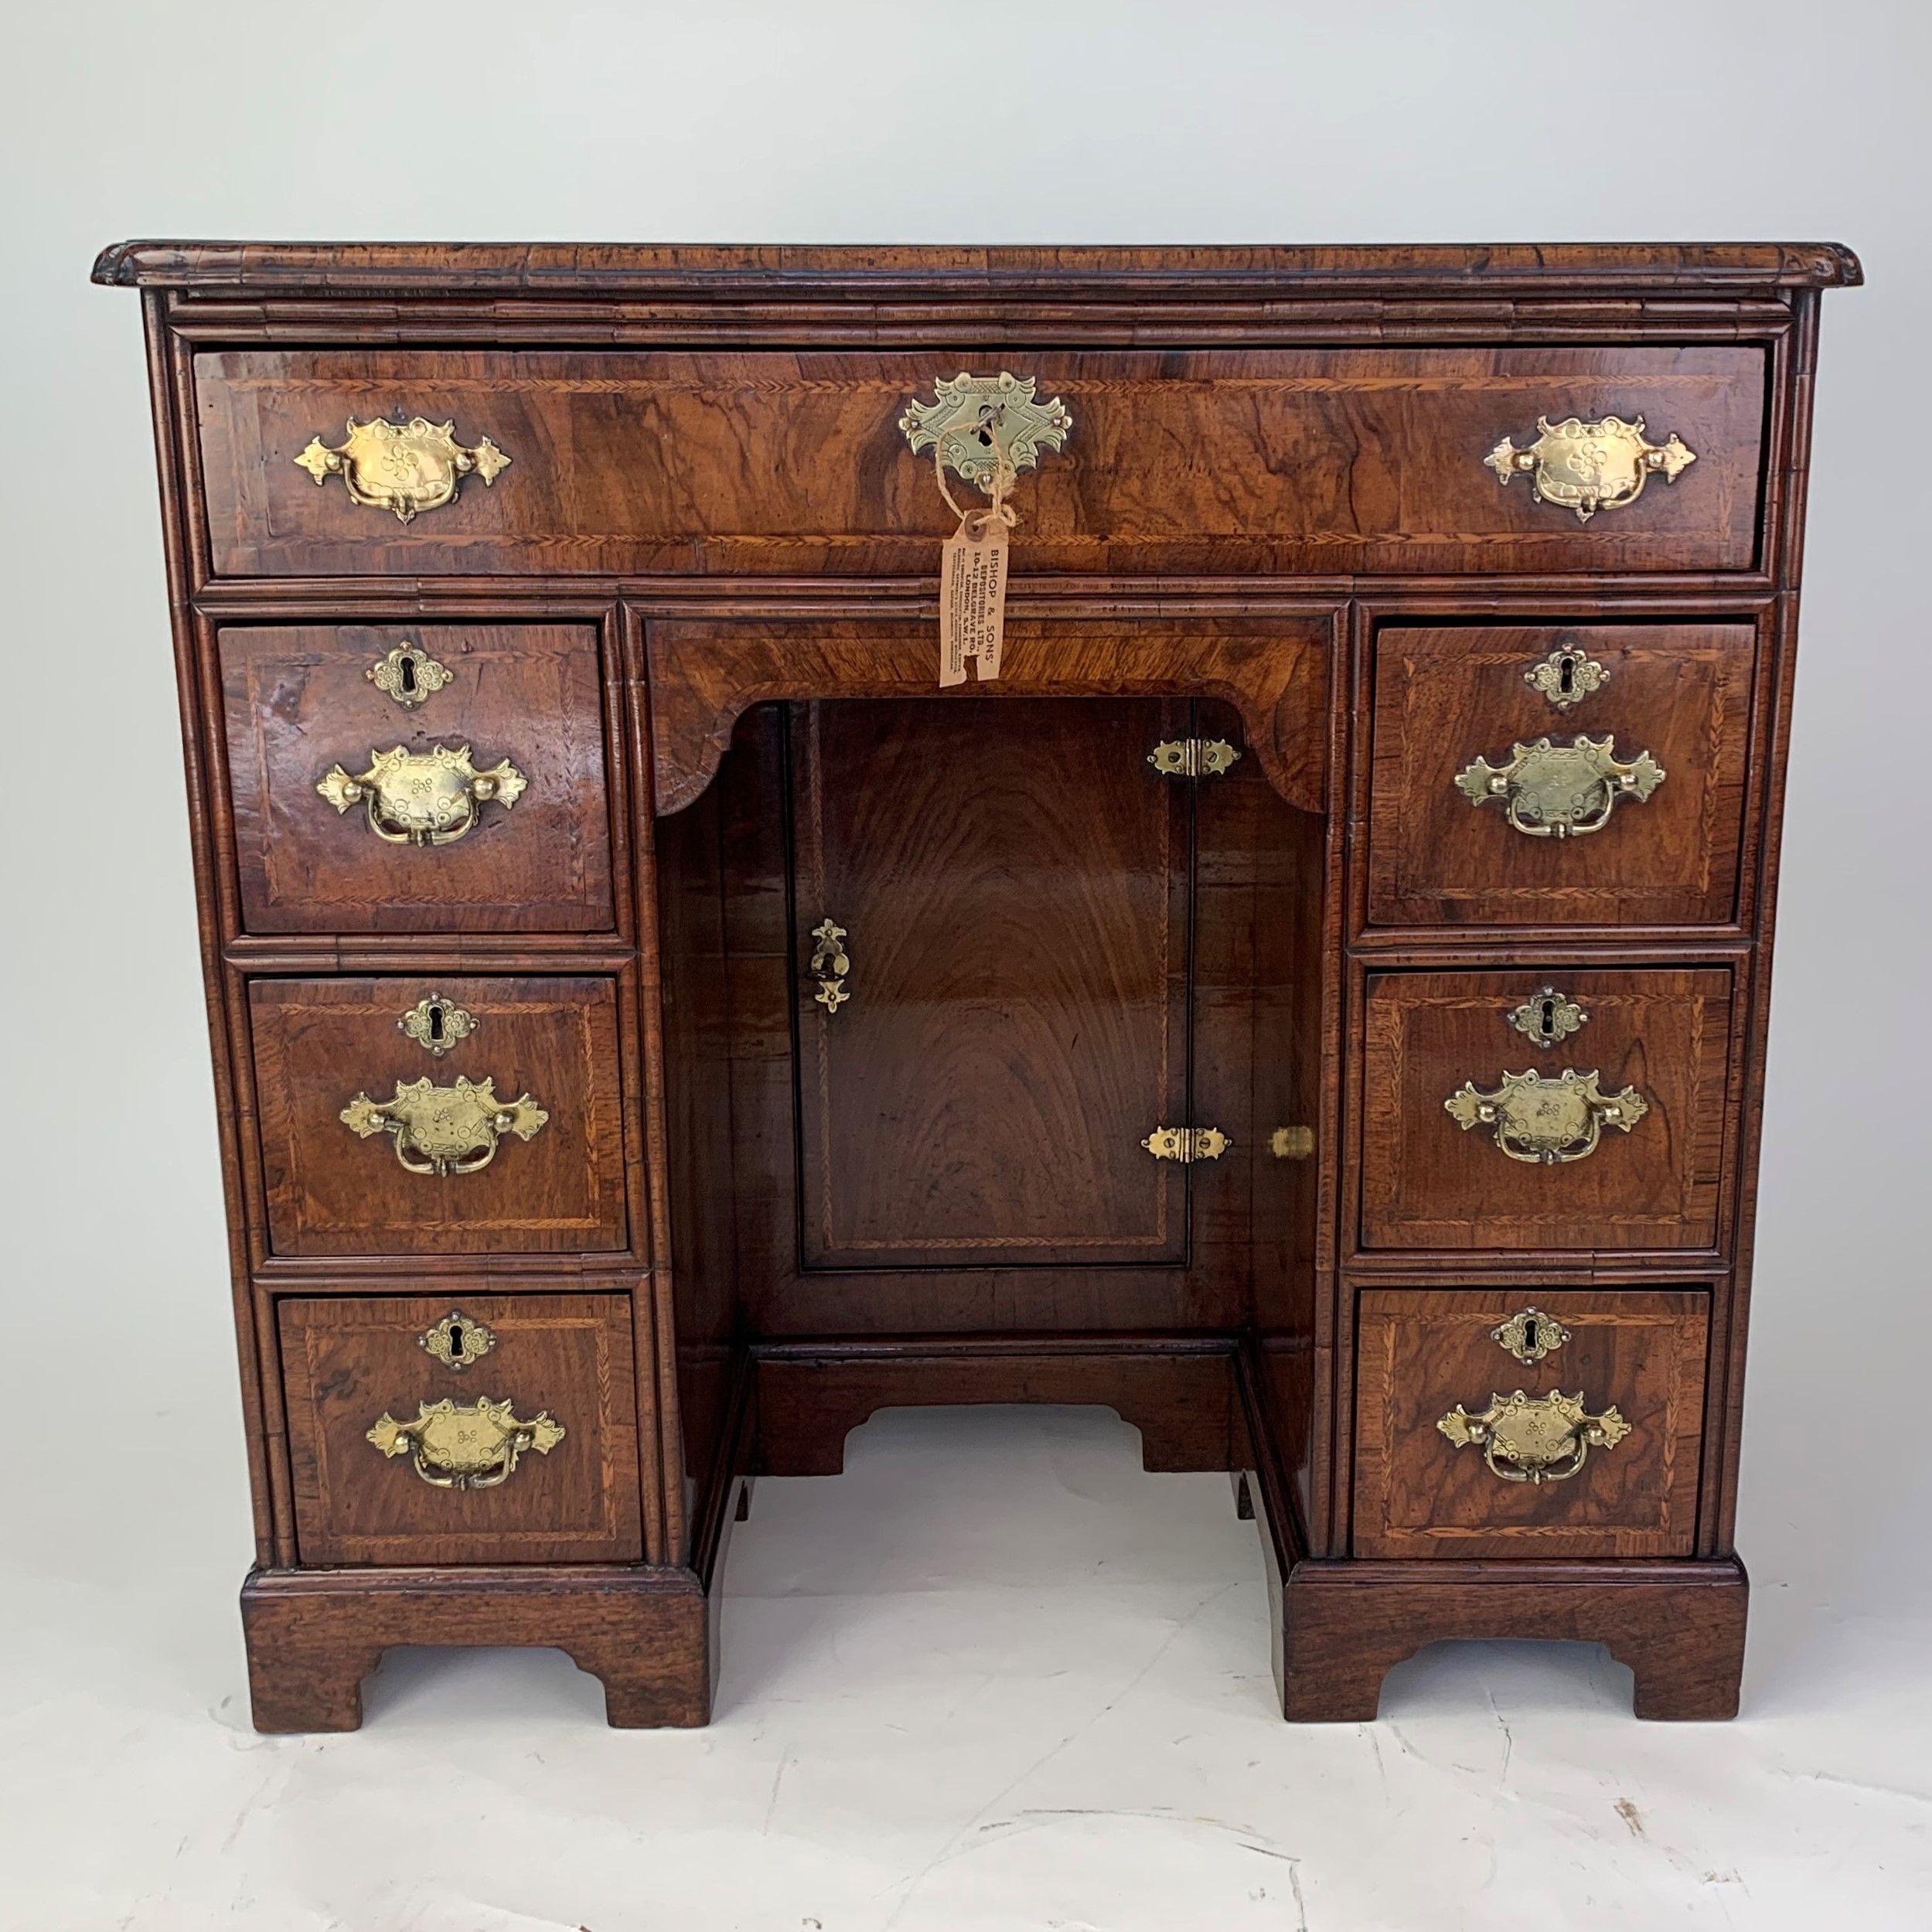 An especially fine quality George II period burr walnut kneehole desk with quartered 'bookmark-veneered' top with herringbone inlay and cross-banding, above a single long drawer and an arrangement of short drawers either side of a central recessed